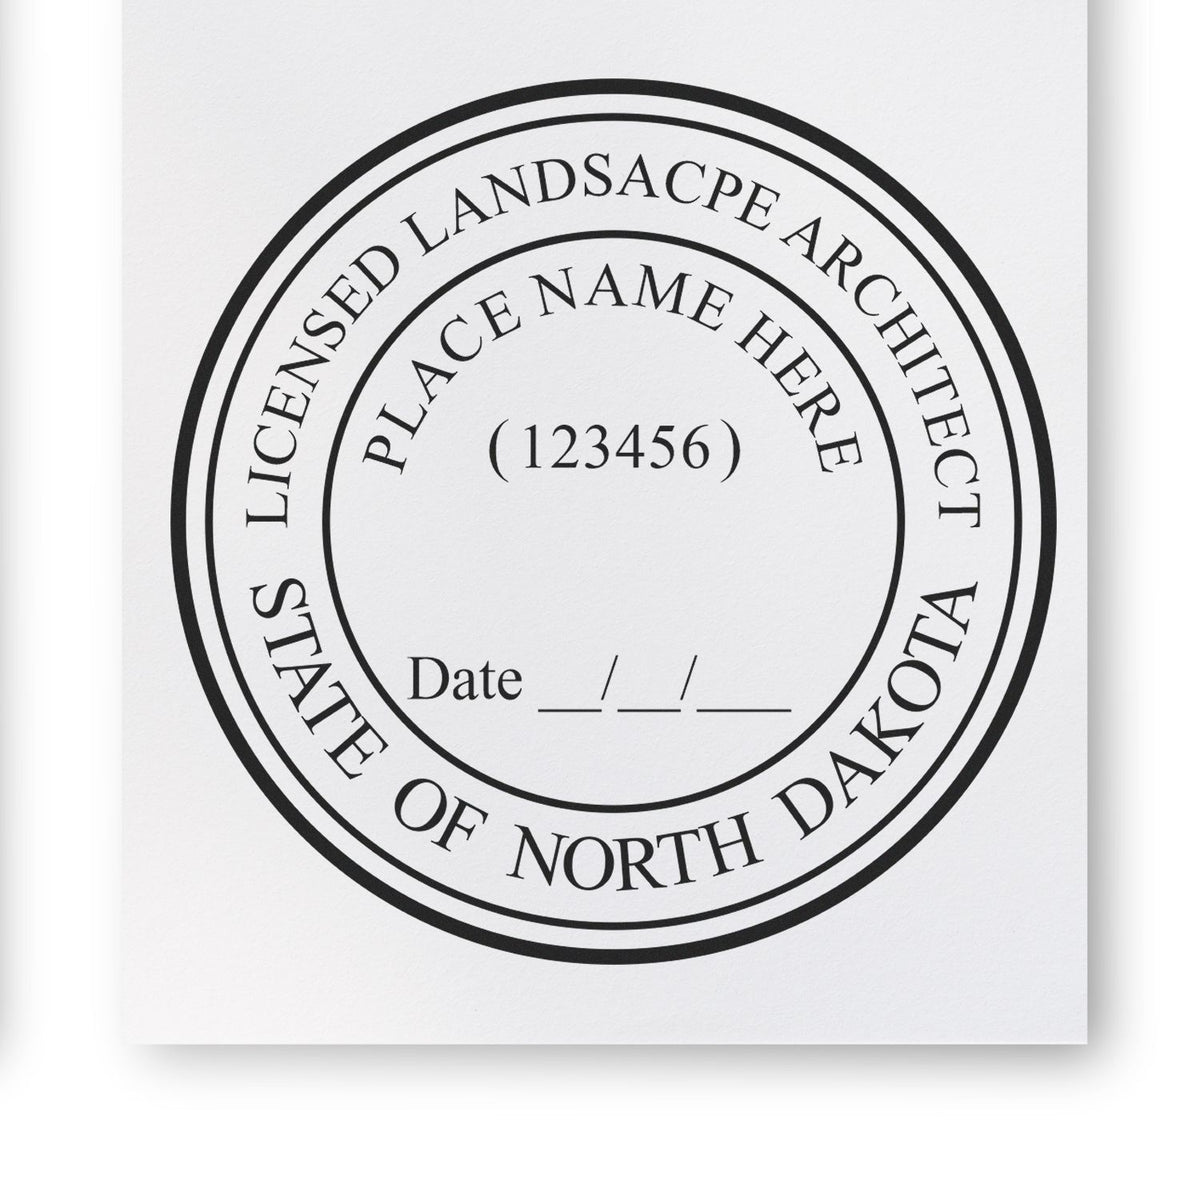 This paper is stamped with a sample imprint of the North Dakota Landscape Architectural Seal Stamp, signifying its quality and reliability.